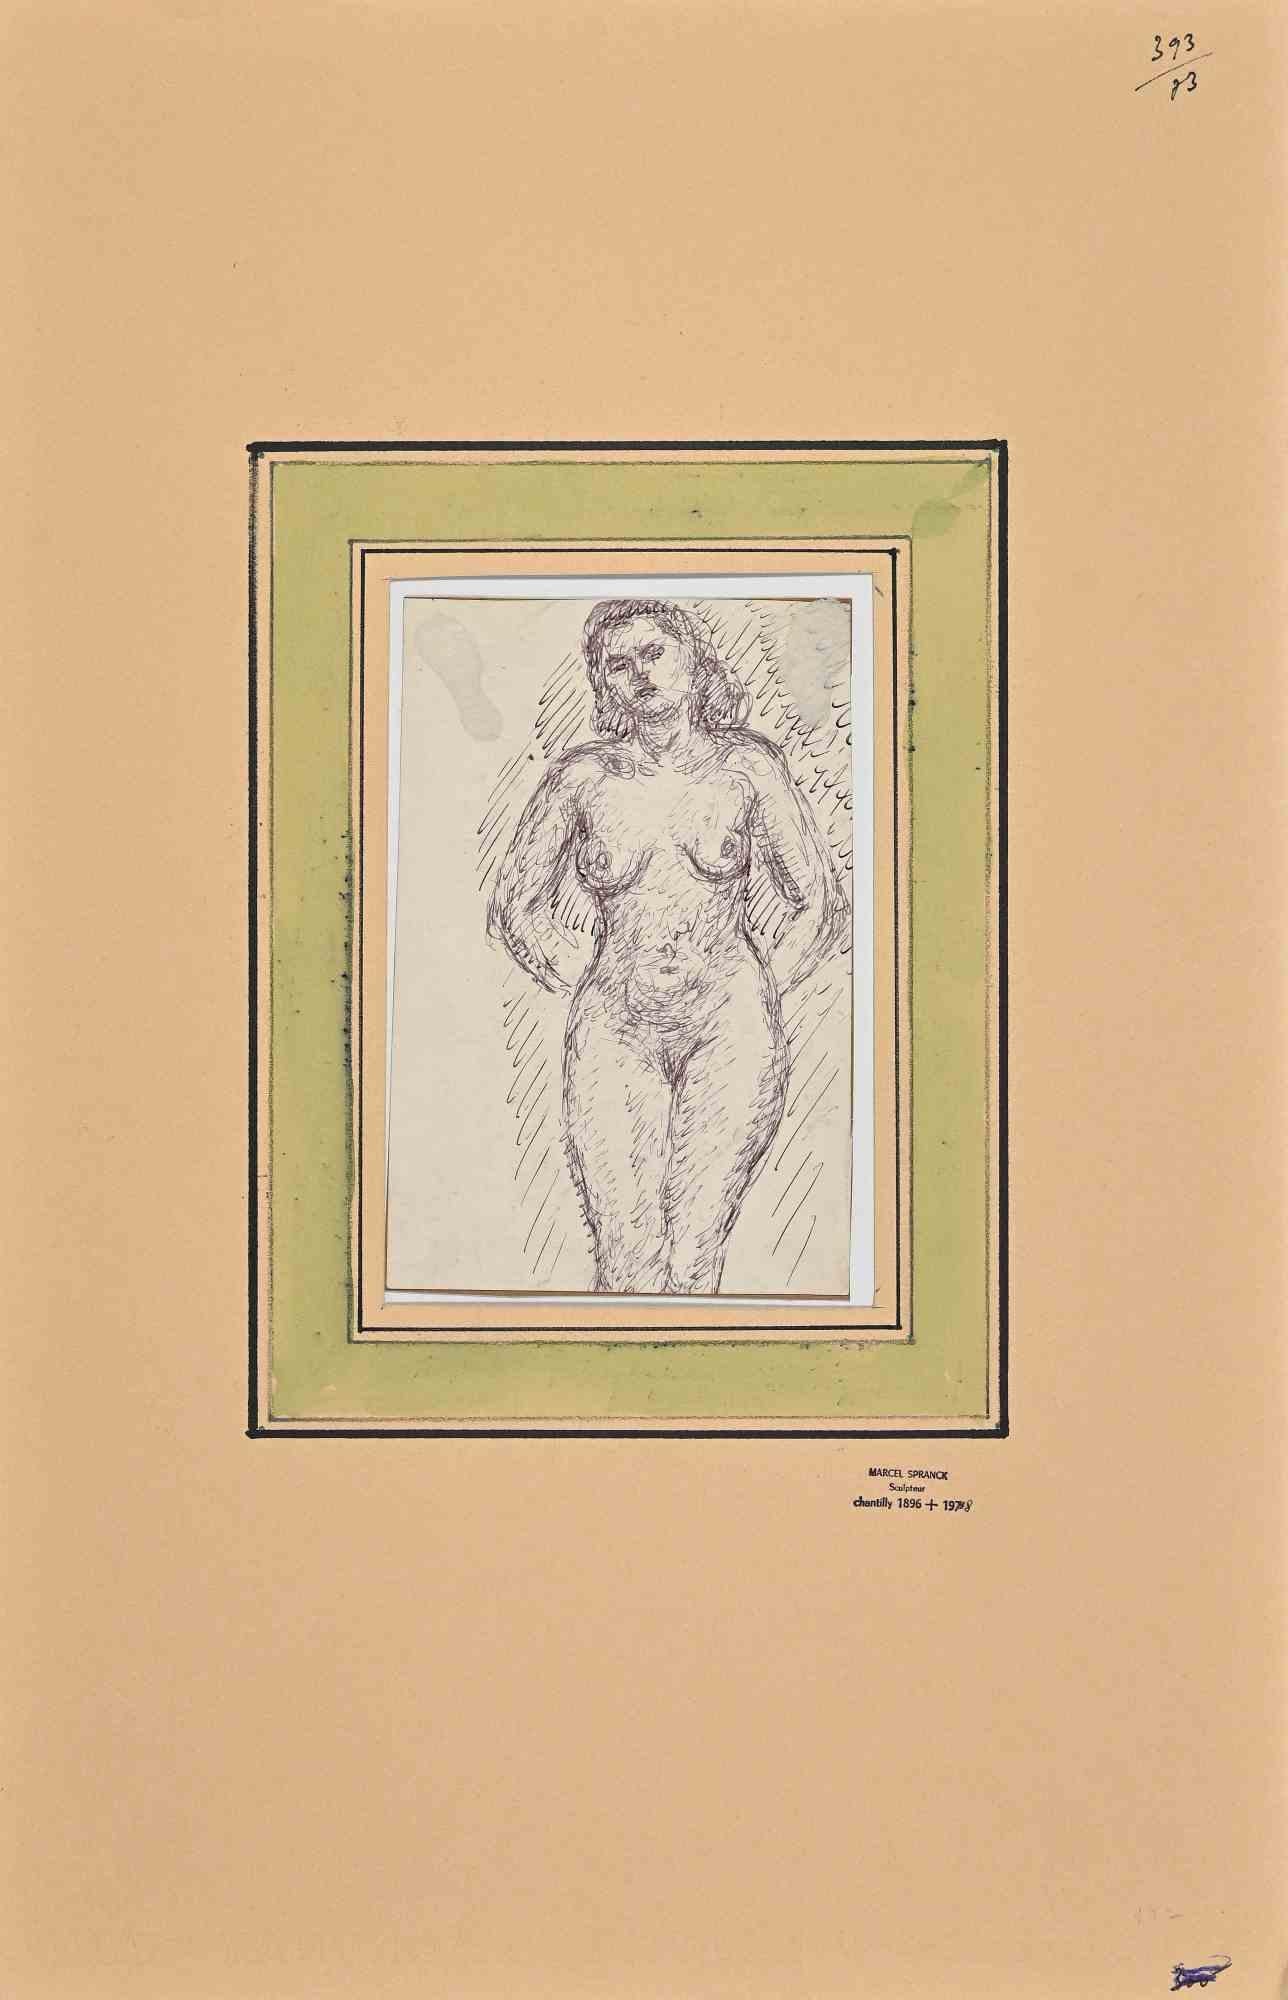 Nude of Woman - China Ink and Pencil by Marcel Spranck - Early 20th Century